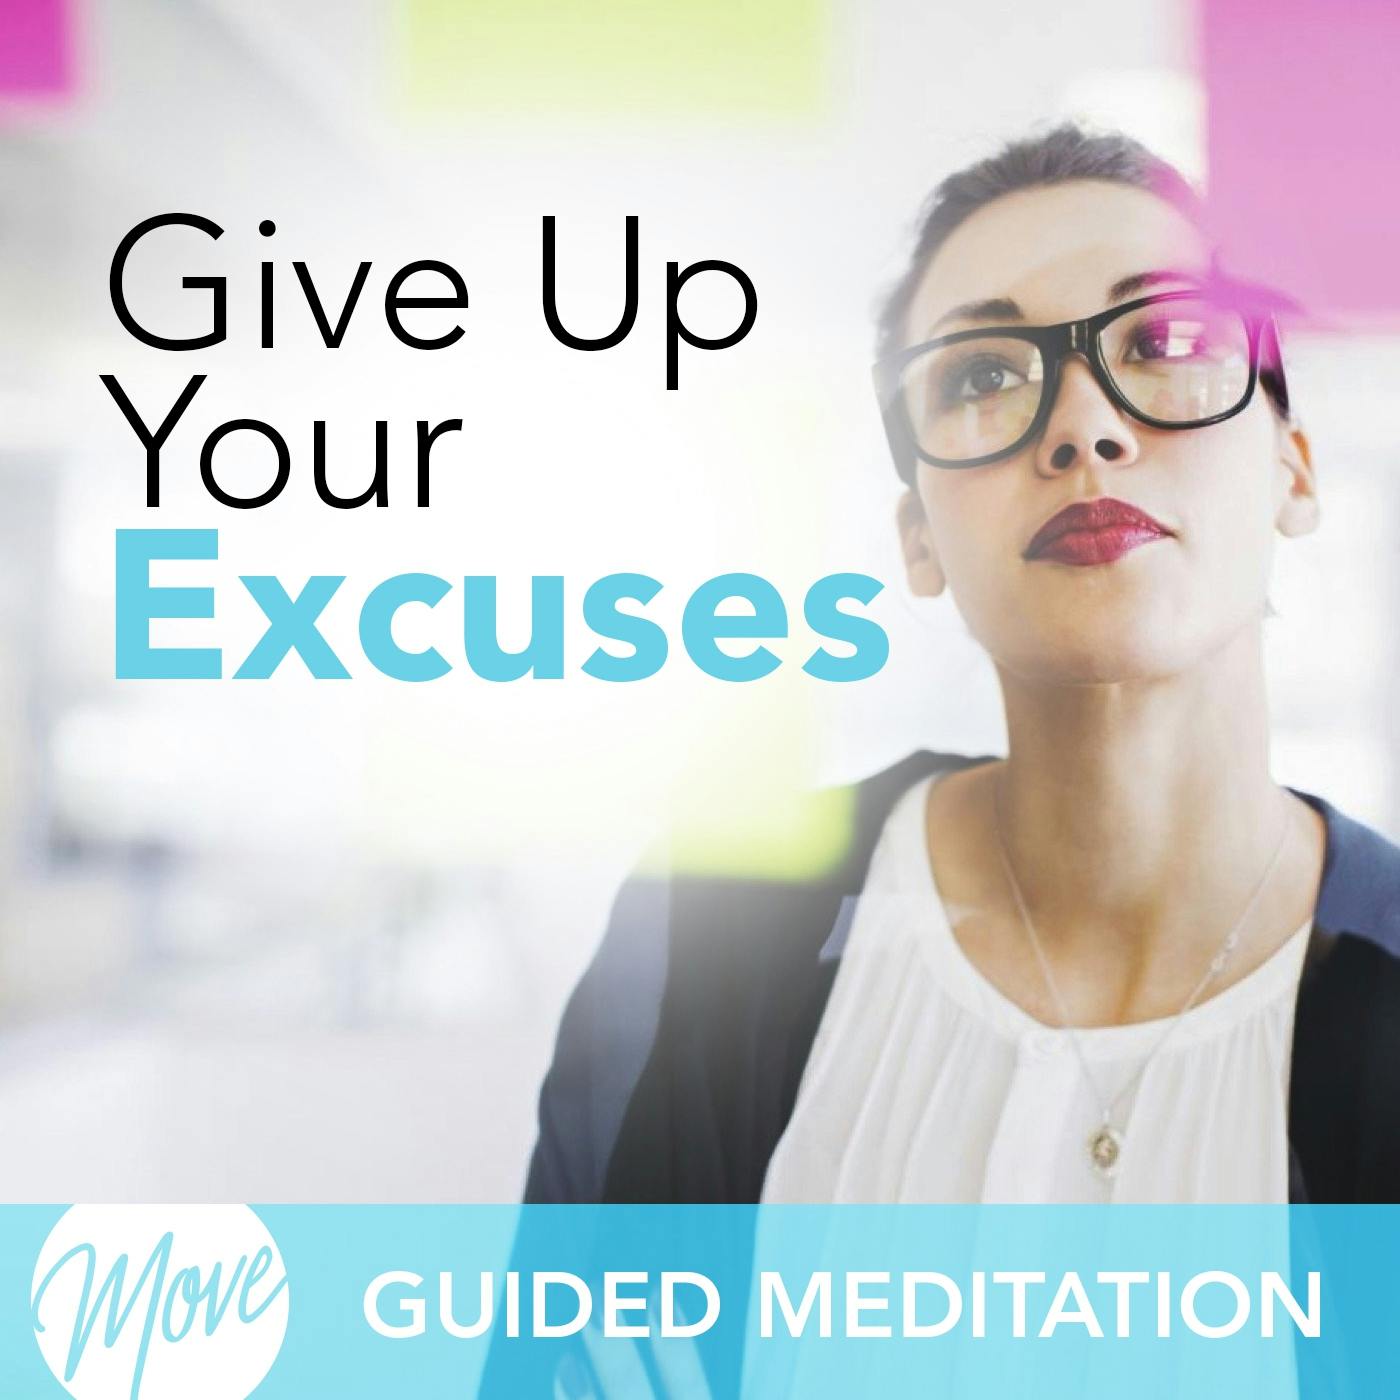 Give Up Your Excuses - Amy Applebaum